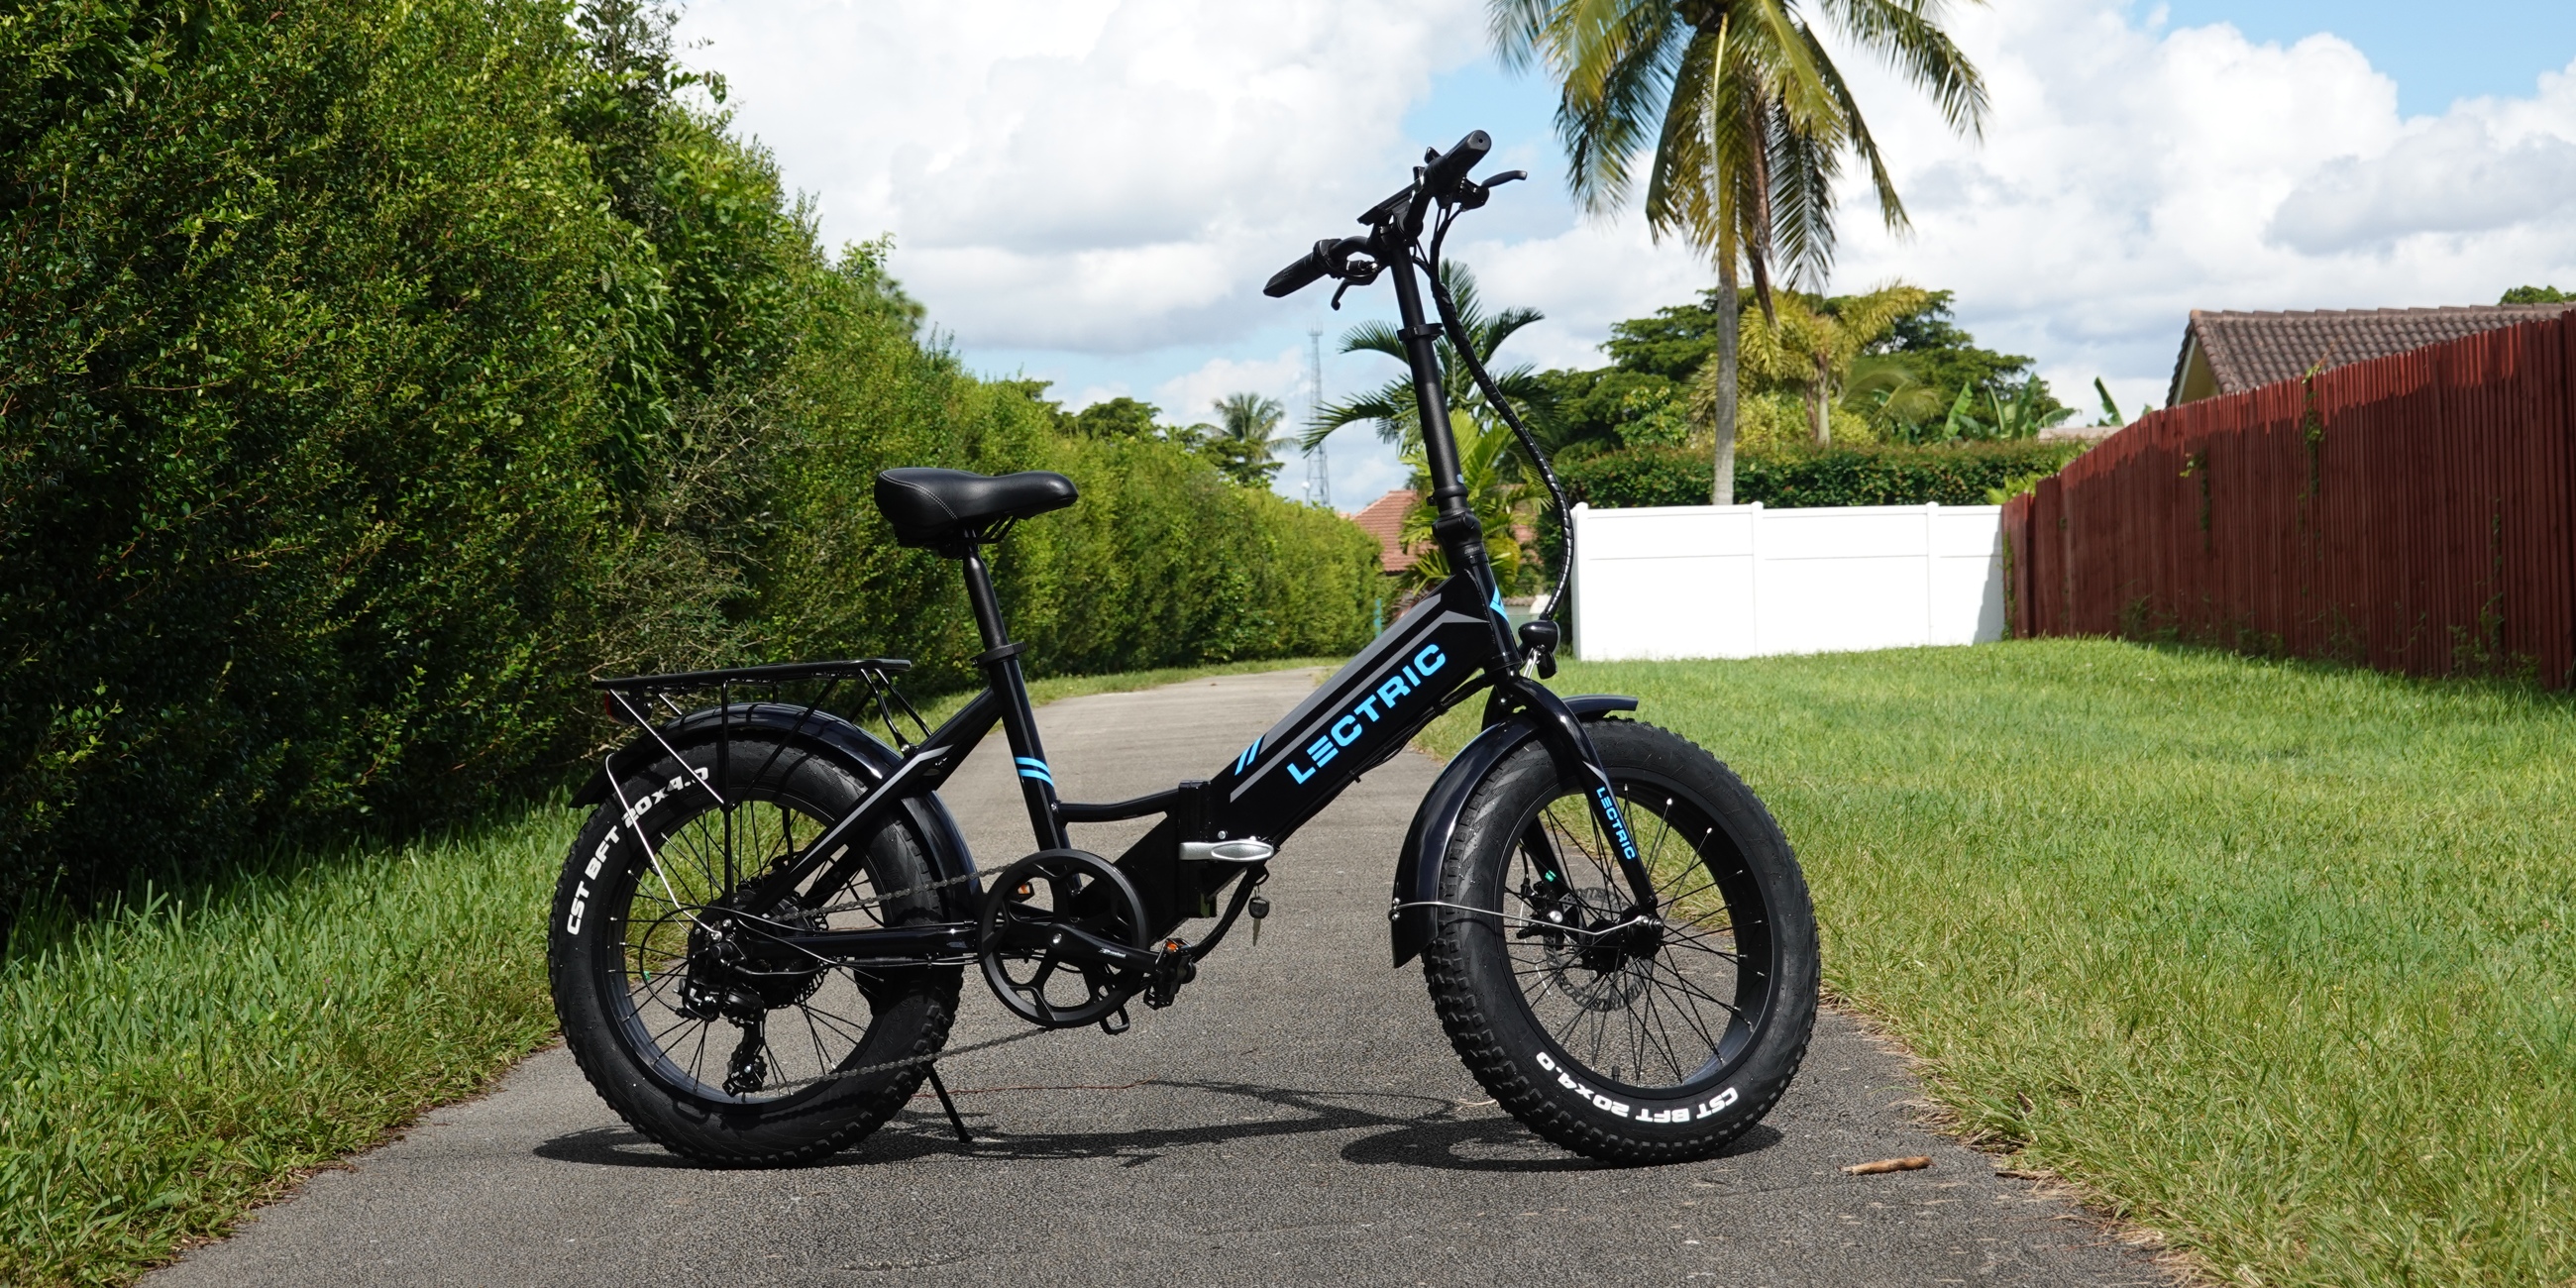 lectric-xpremium-e-bike-launched-with-mid-drive-motor-and-dual